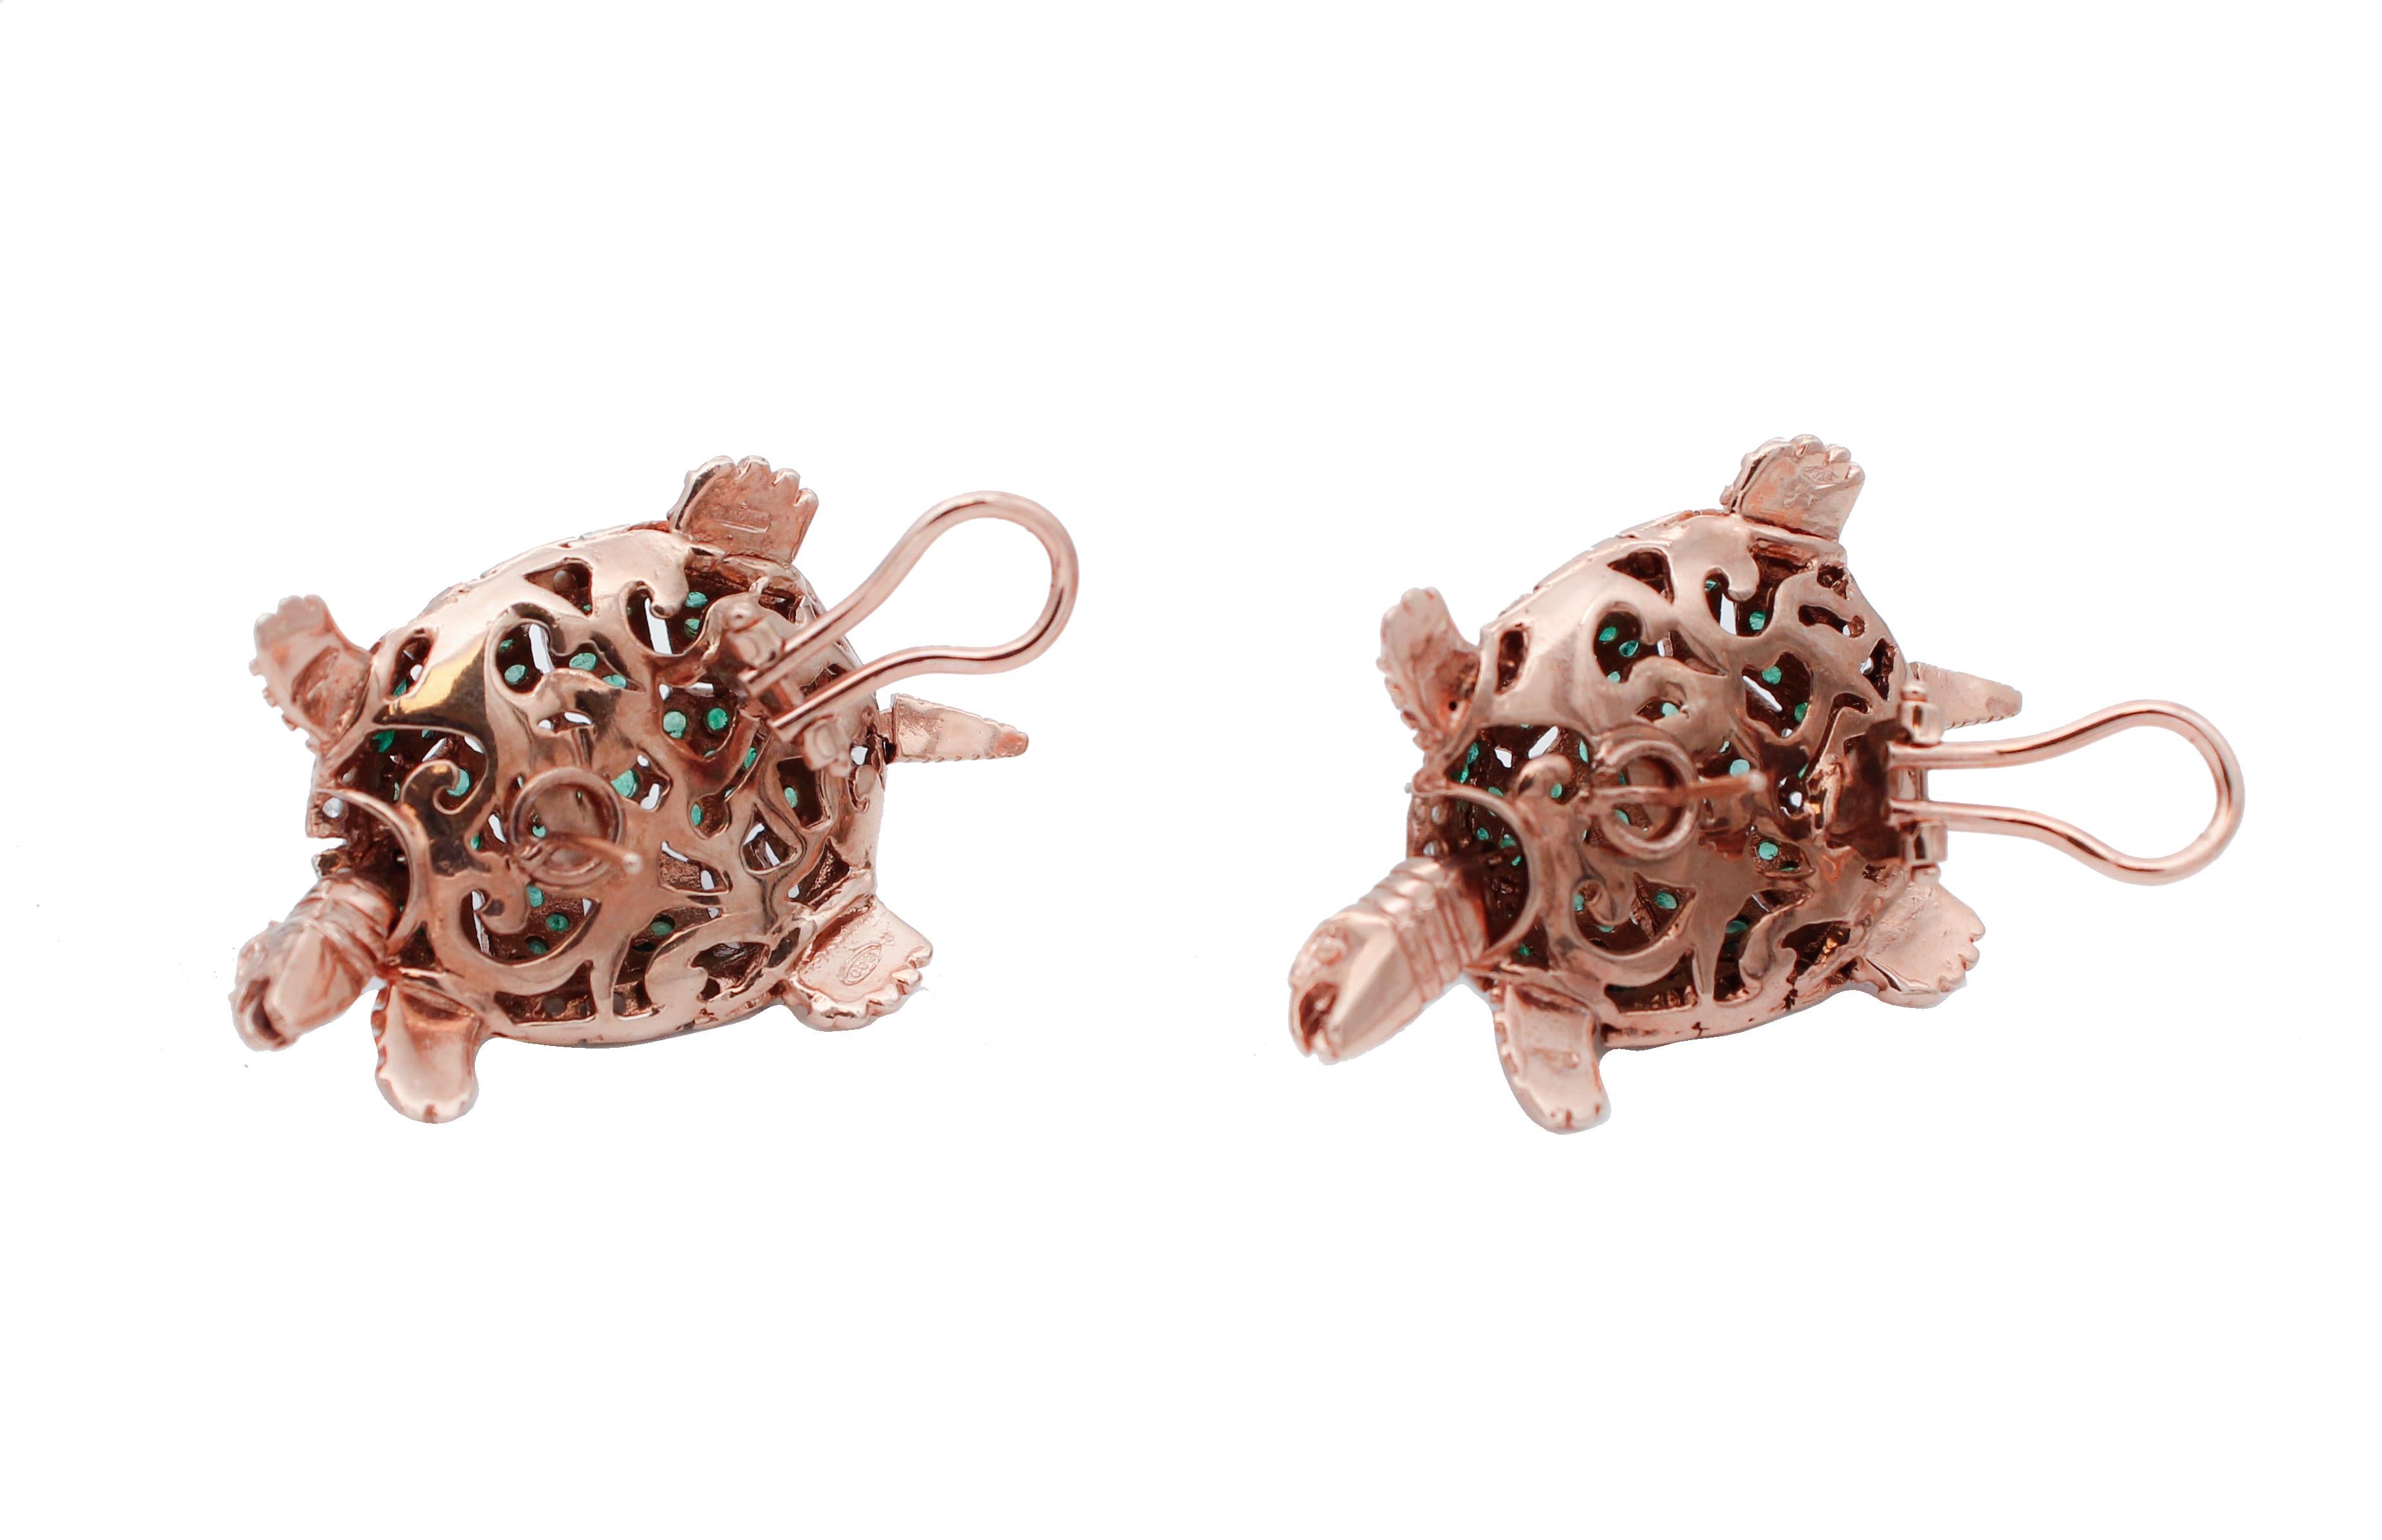 Round Cut Emeralds, Diamonds 9 Karat Rose Gold and Silver Turtle Earrings